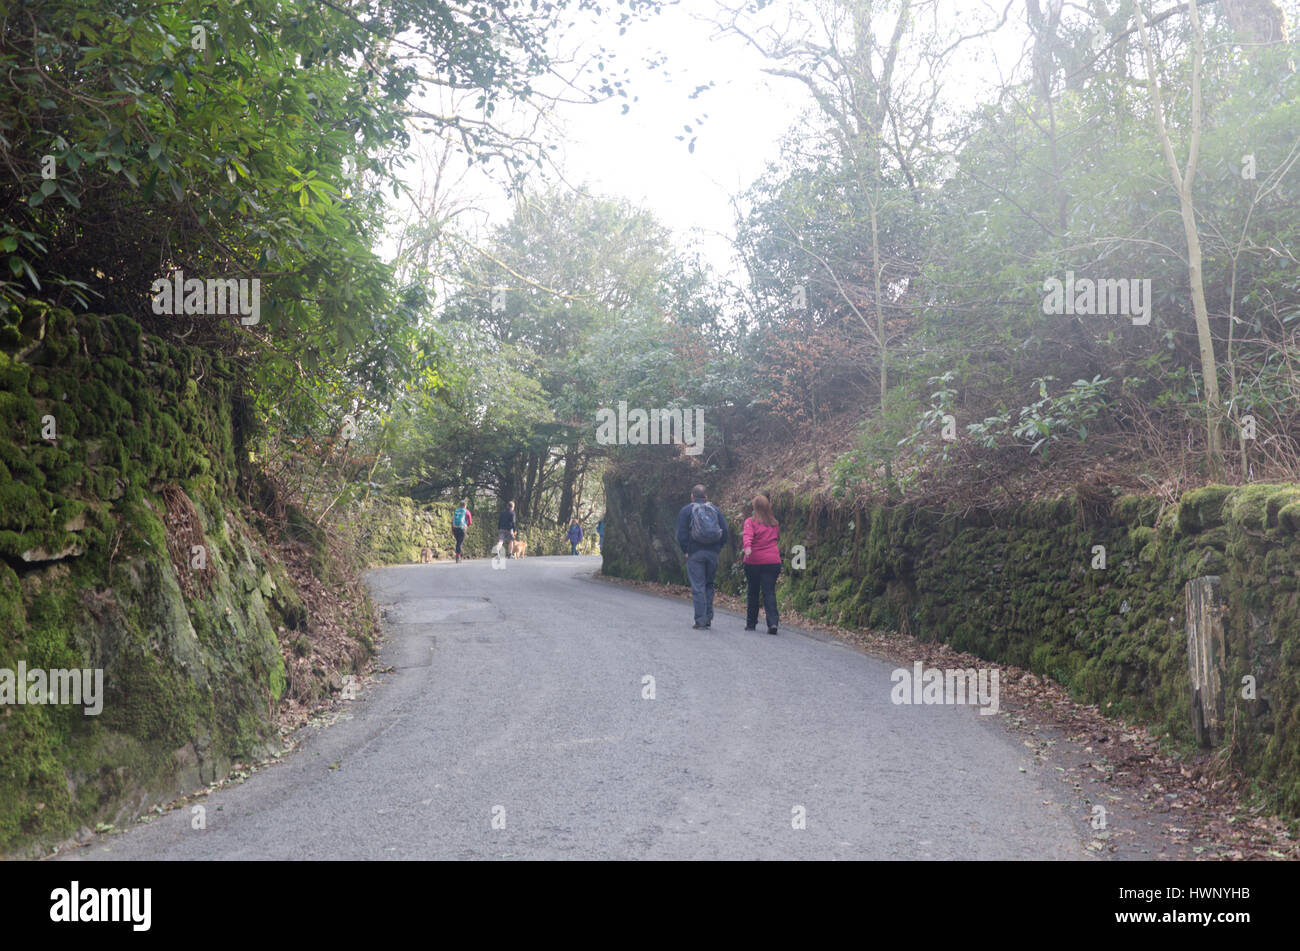 Ramblers on a winding road, Grasmere, Cumbria, Lake District Stock Photo